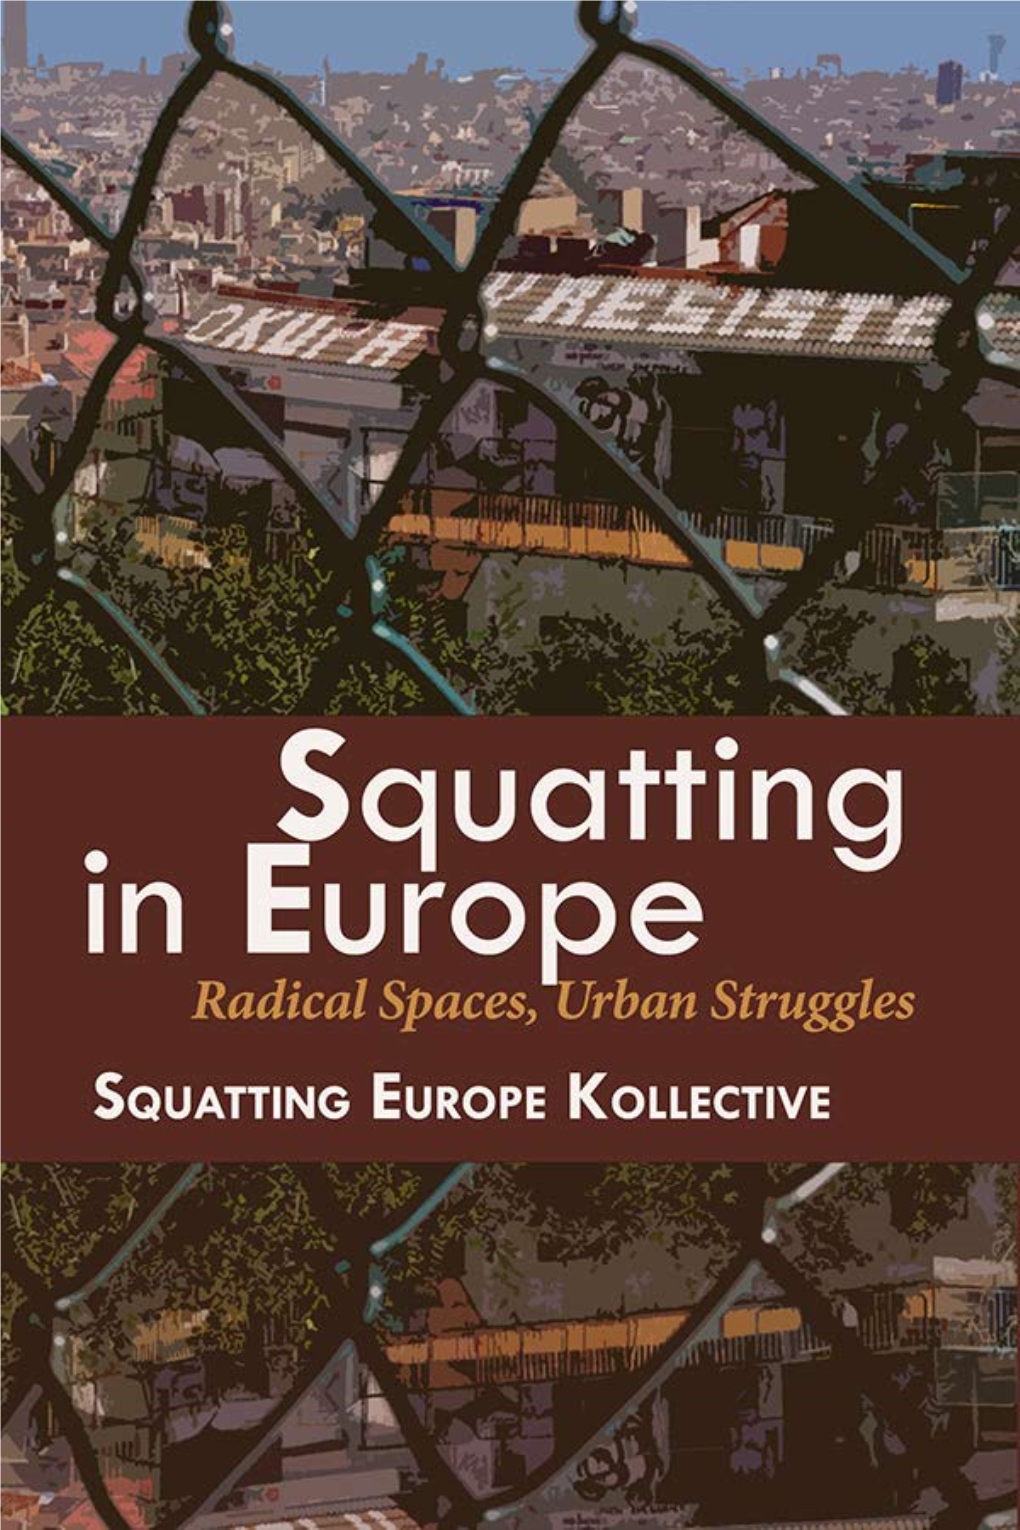 Squatting in Europe: Radical Spaces, Urban Struggles Edited by the Squatting Europe Kollective